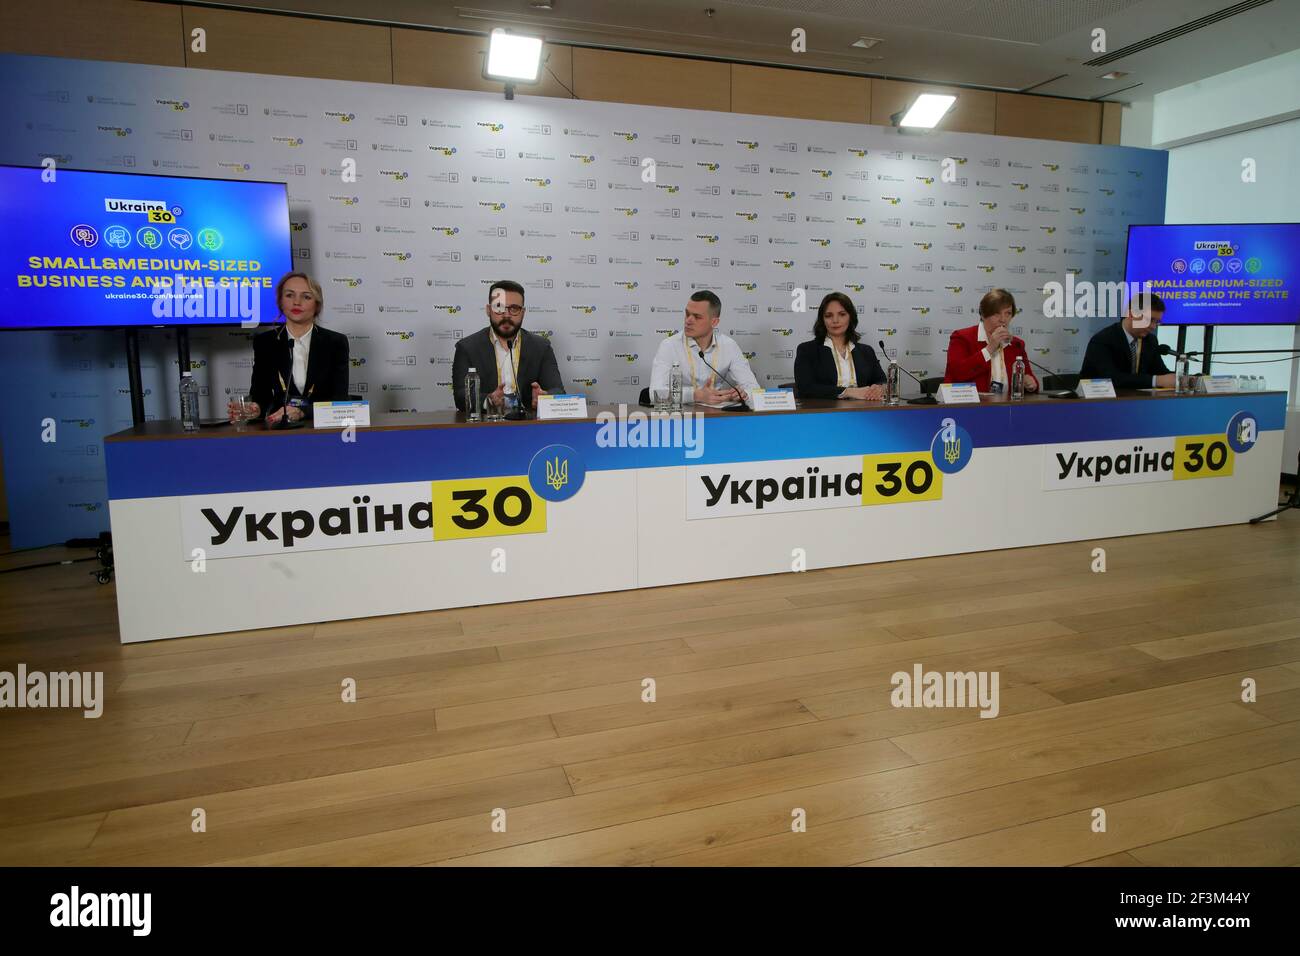 KYIV, UKRAINE - MARCH 17, 2021 - Participants are pictured during a news conference held on the sidelines of the Ukraine 30. Small and Medium Business Stock Photo